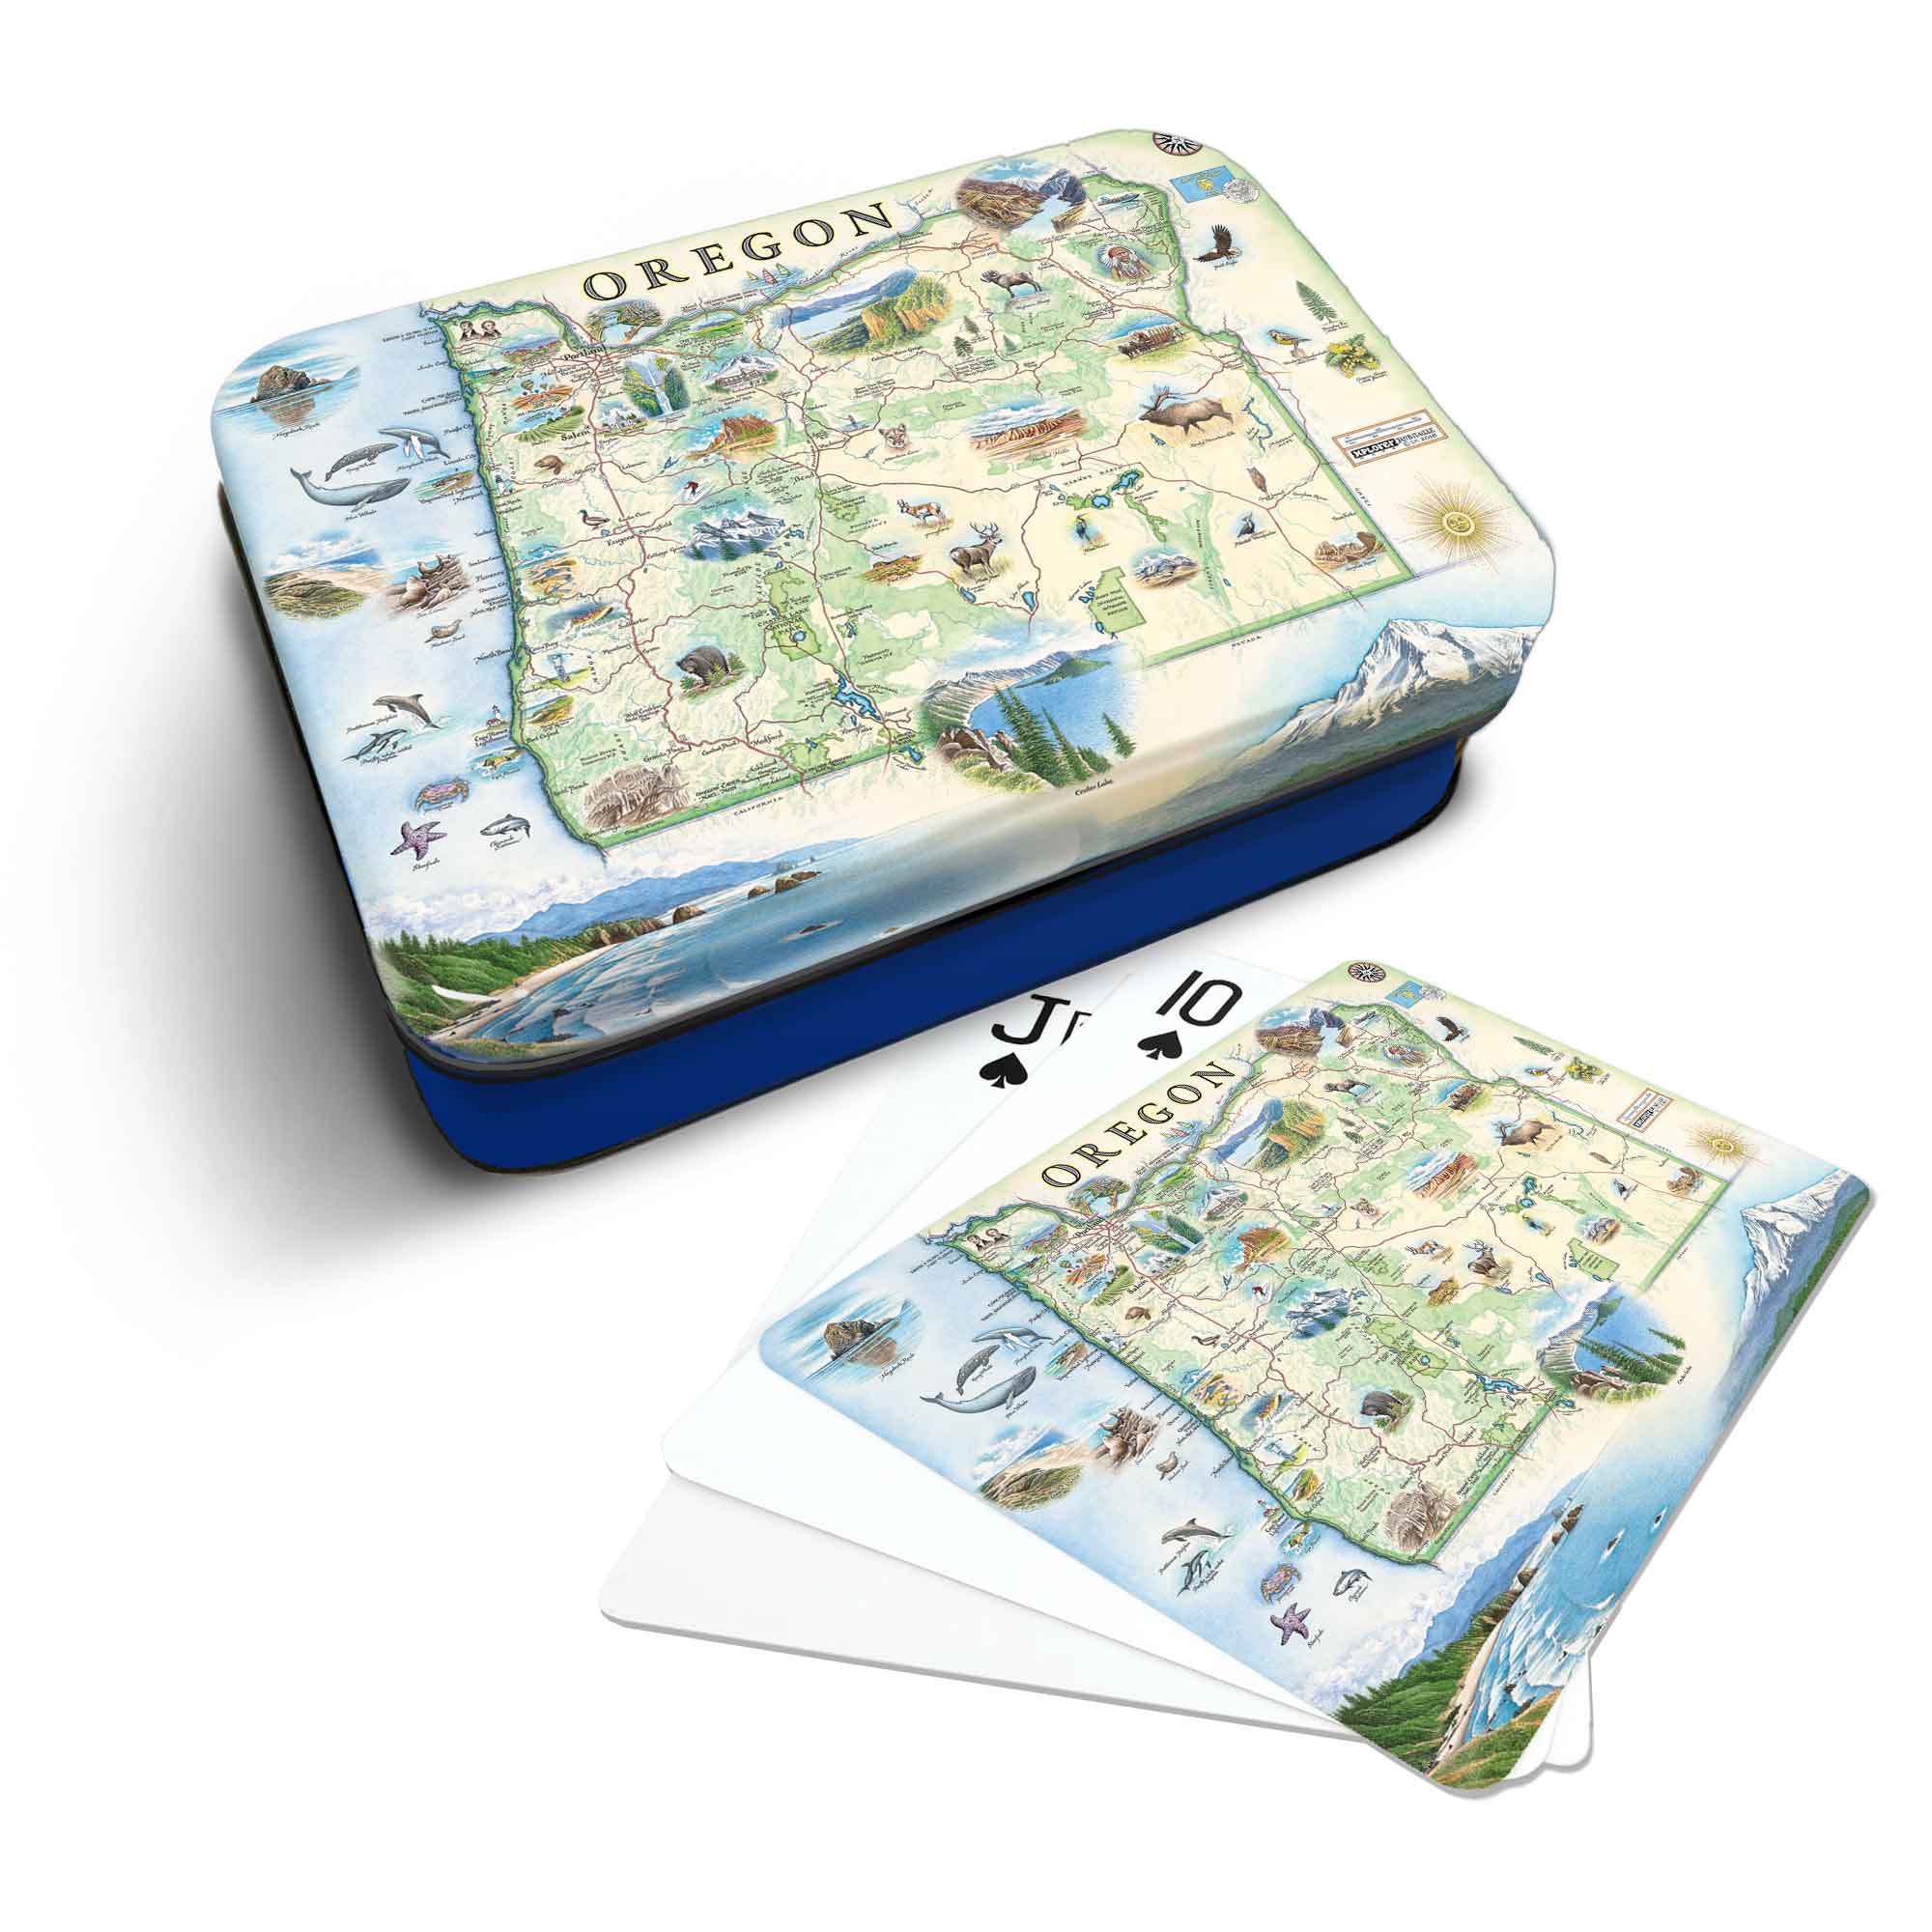 Oregon Map Playing cards that features iconic attractions, flora and fauna of that area - Blue Metal Tin